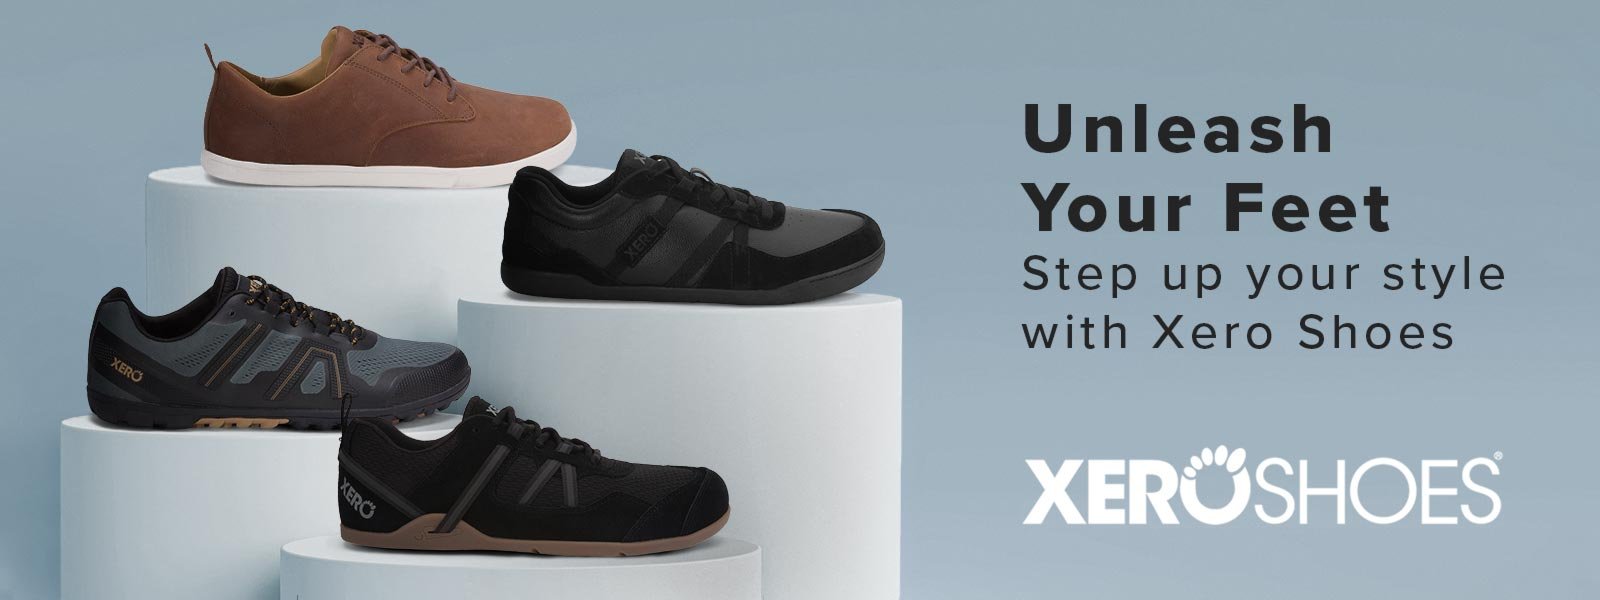 A Foot Doctor Review's The Xero Shoes Forza Trainer